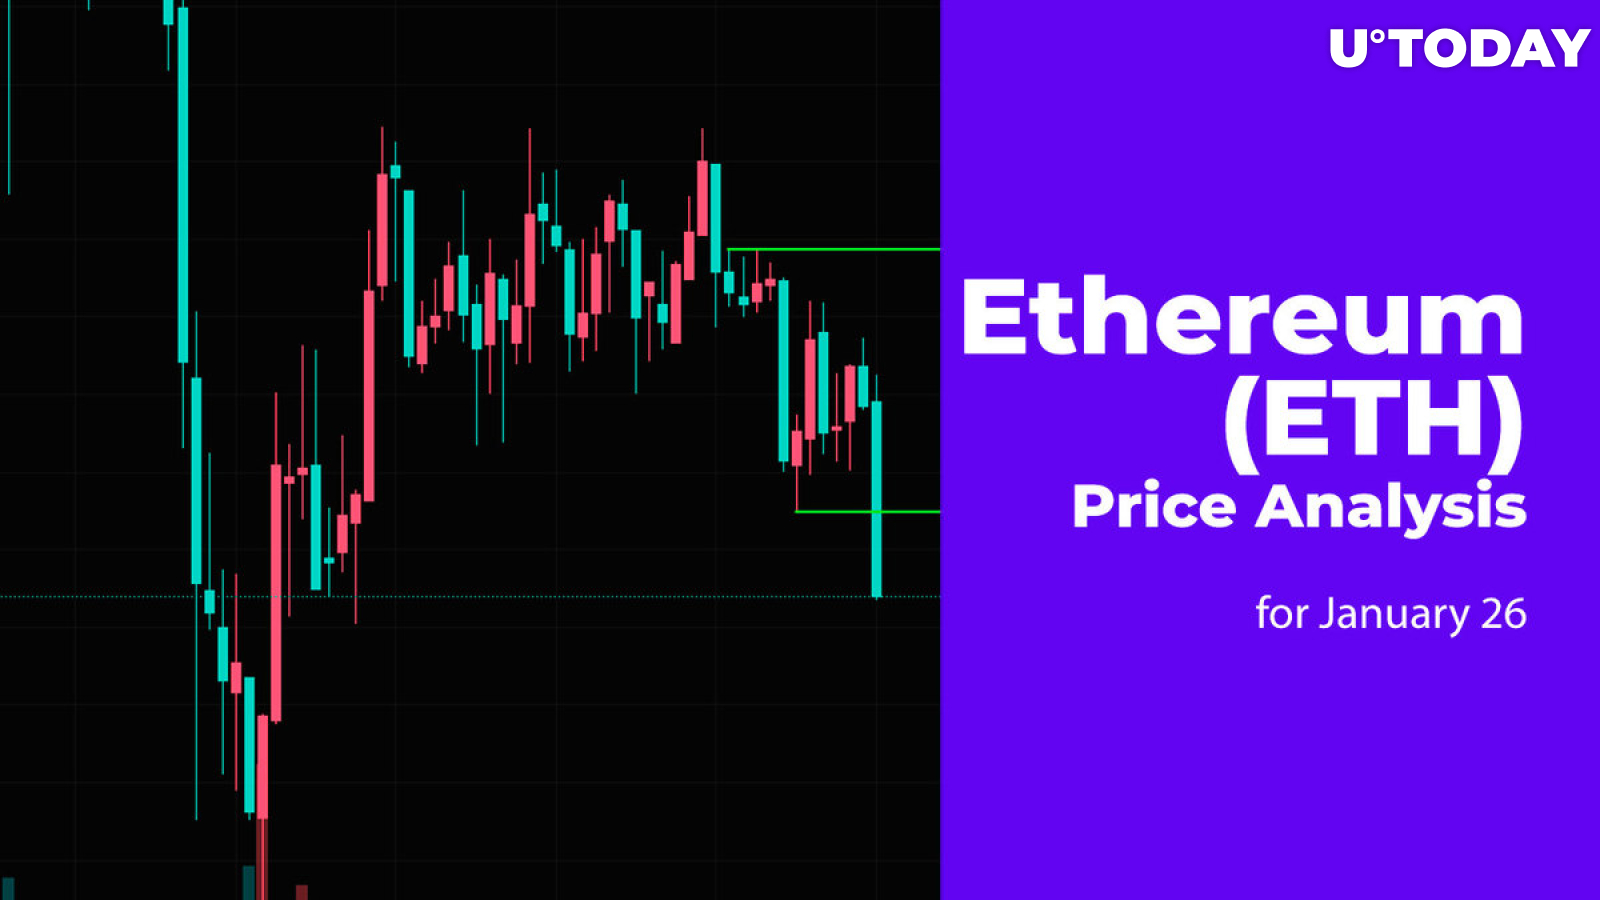 Ethereum (ETH) Price Analysis for January 26